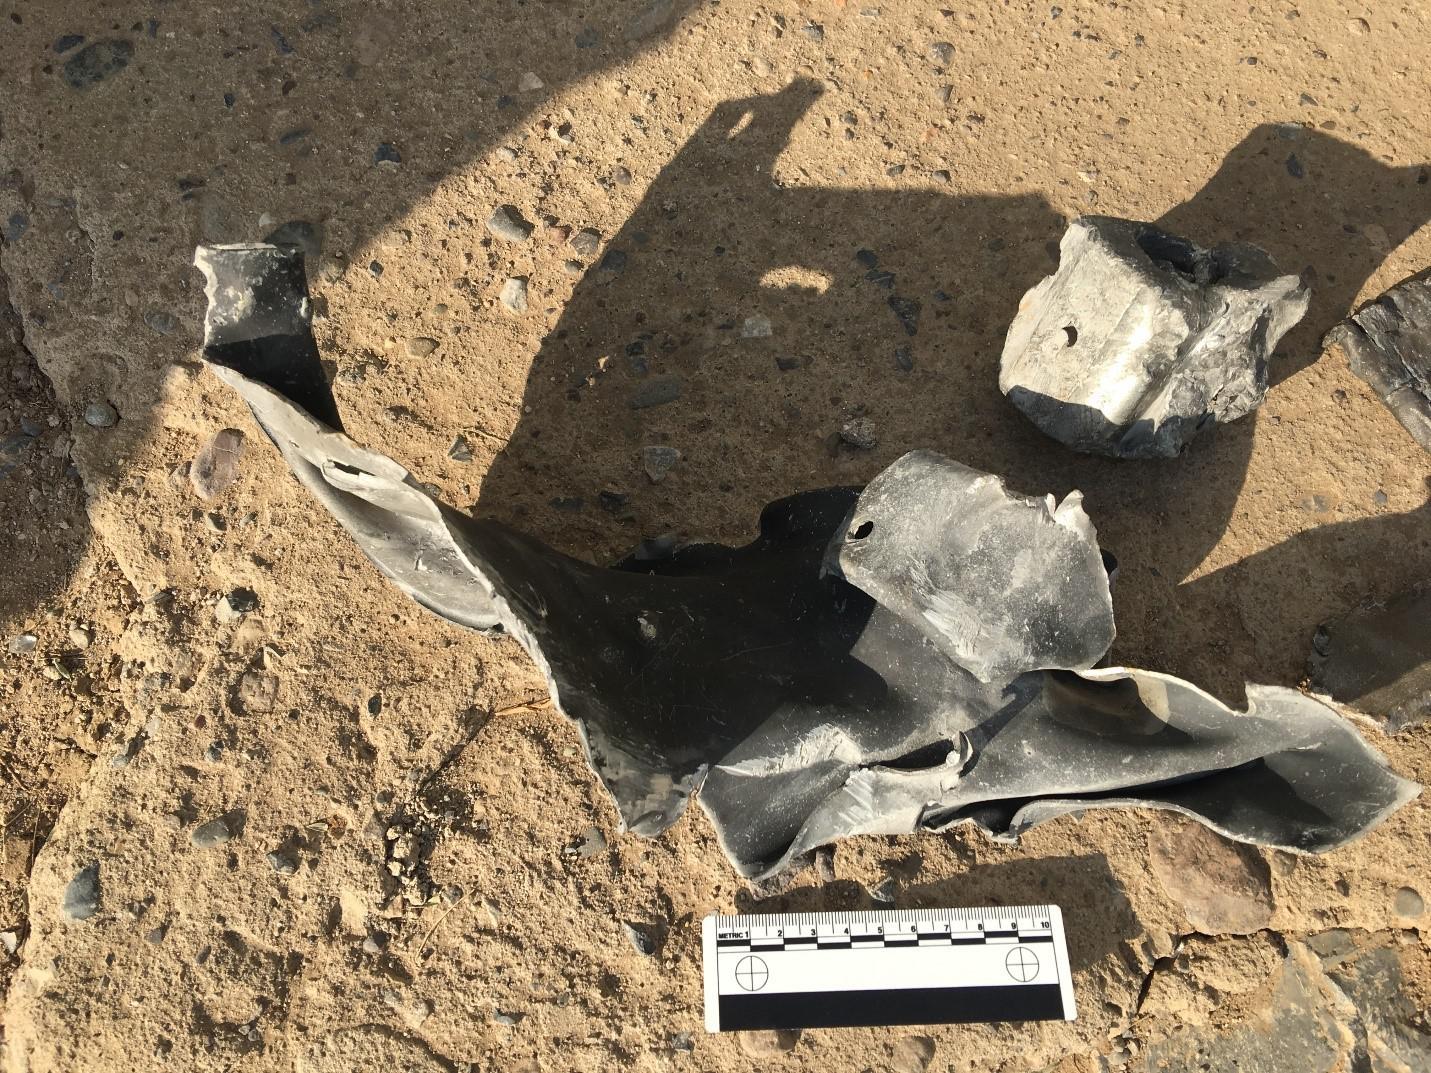 Remnants of a US-made JDAM satellite-guided bomb at the al-Zaydiya security directorate in Hodeida governorate, where coalition bombs killed at least 63 people on October 29. Photograph by Priyanka Motaparthy. 